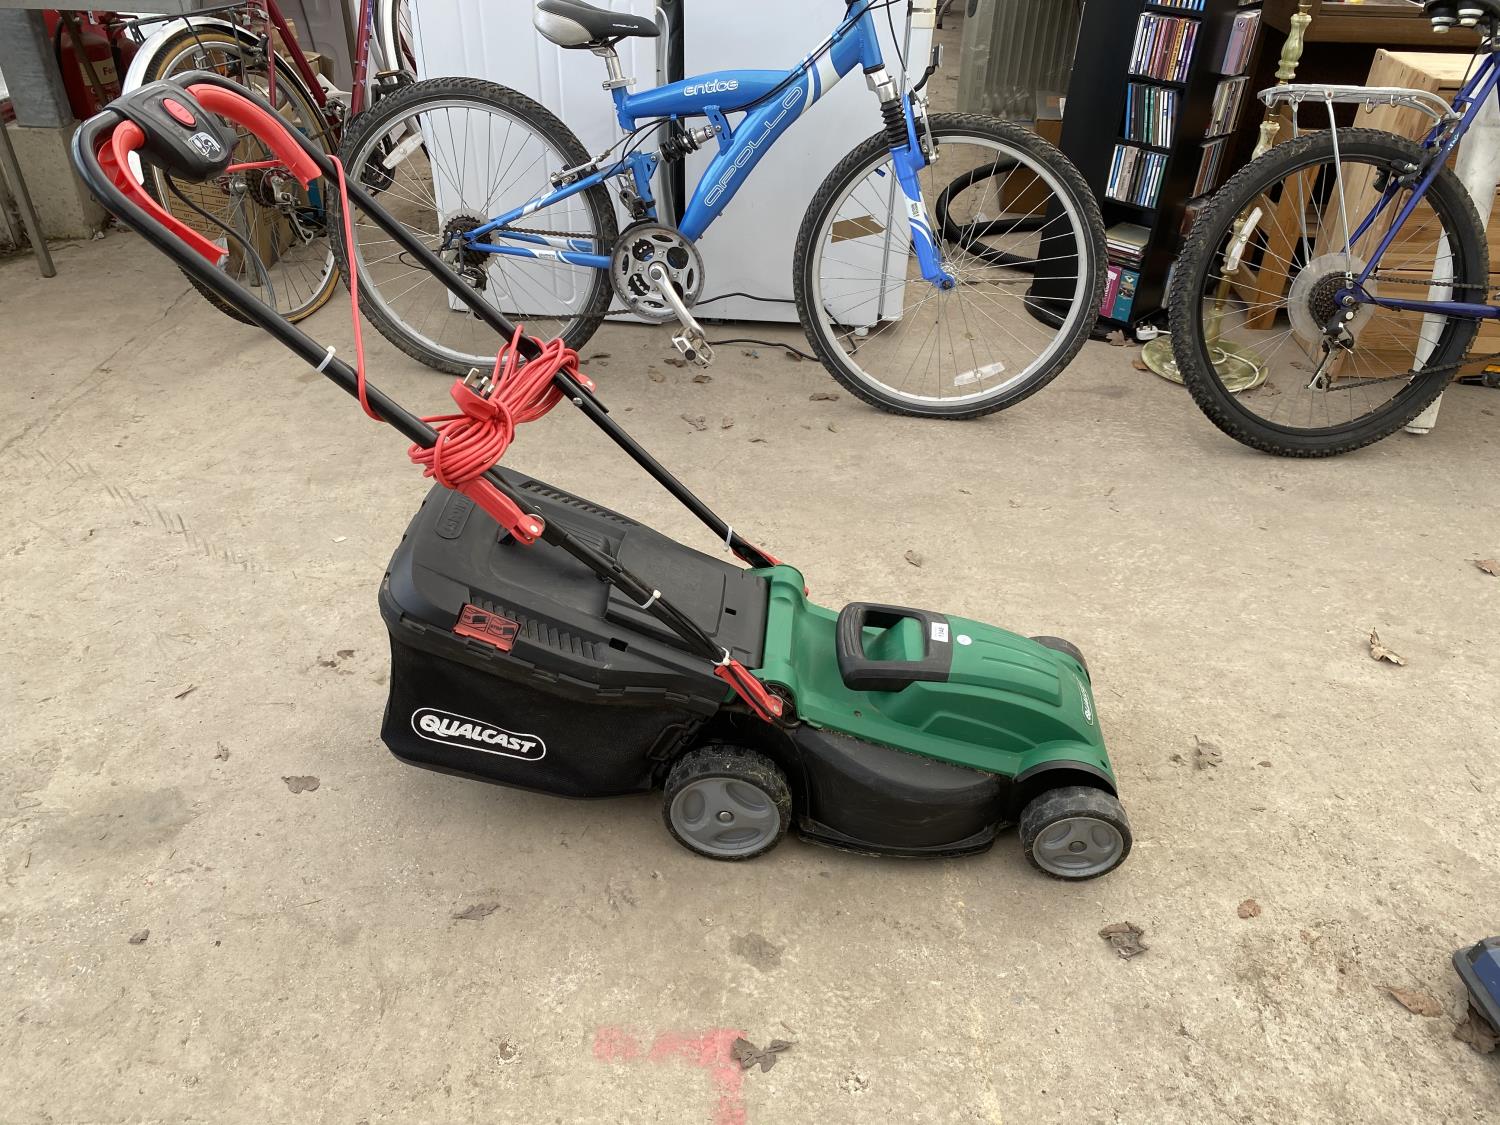 A QUALCAST ELECTRIC LAWN MOWER - Image 2 of 5